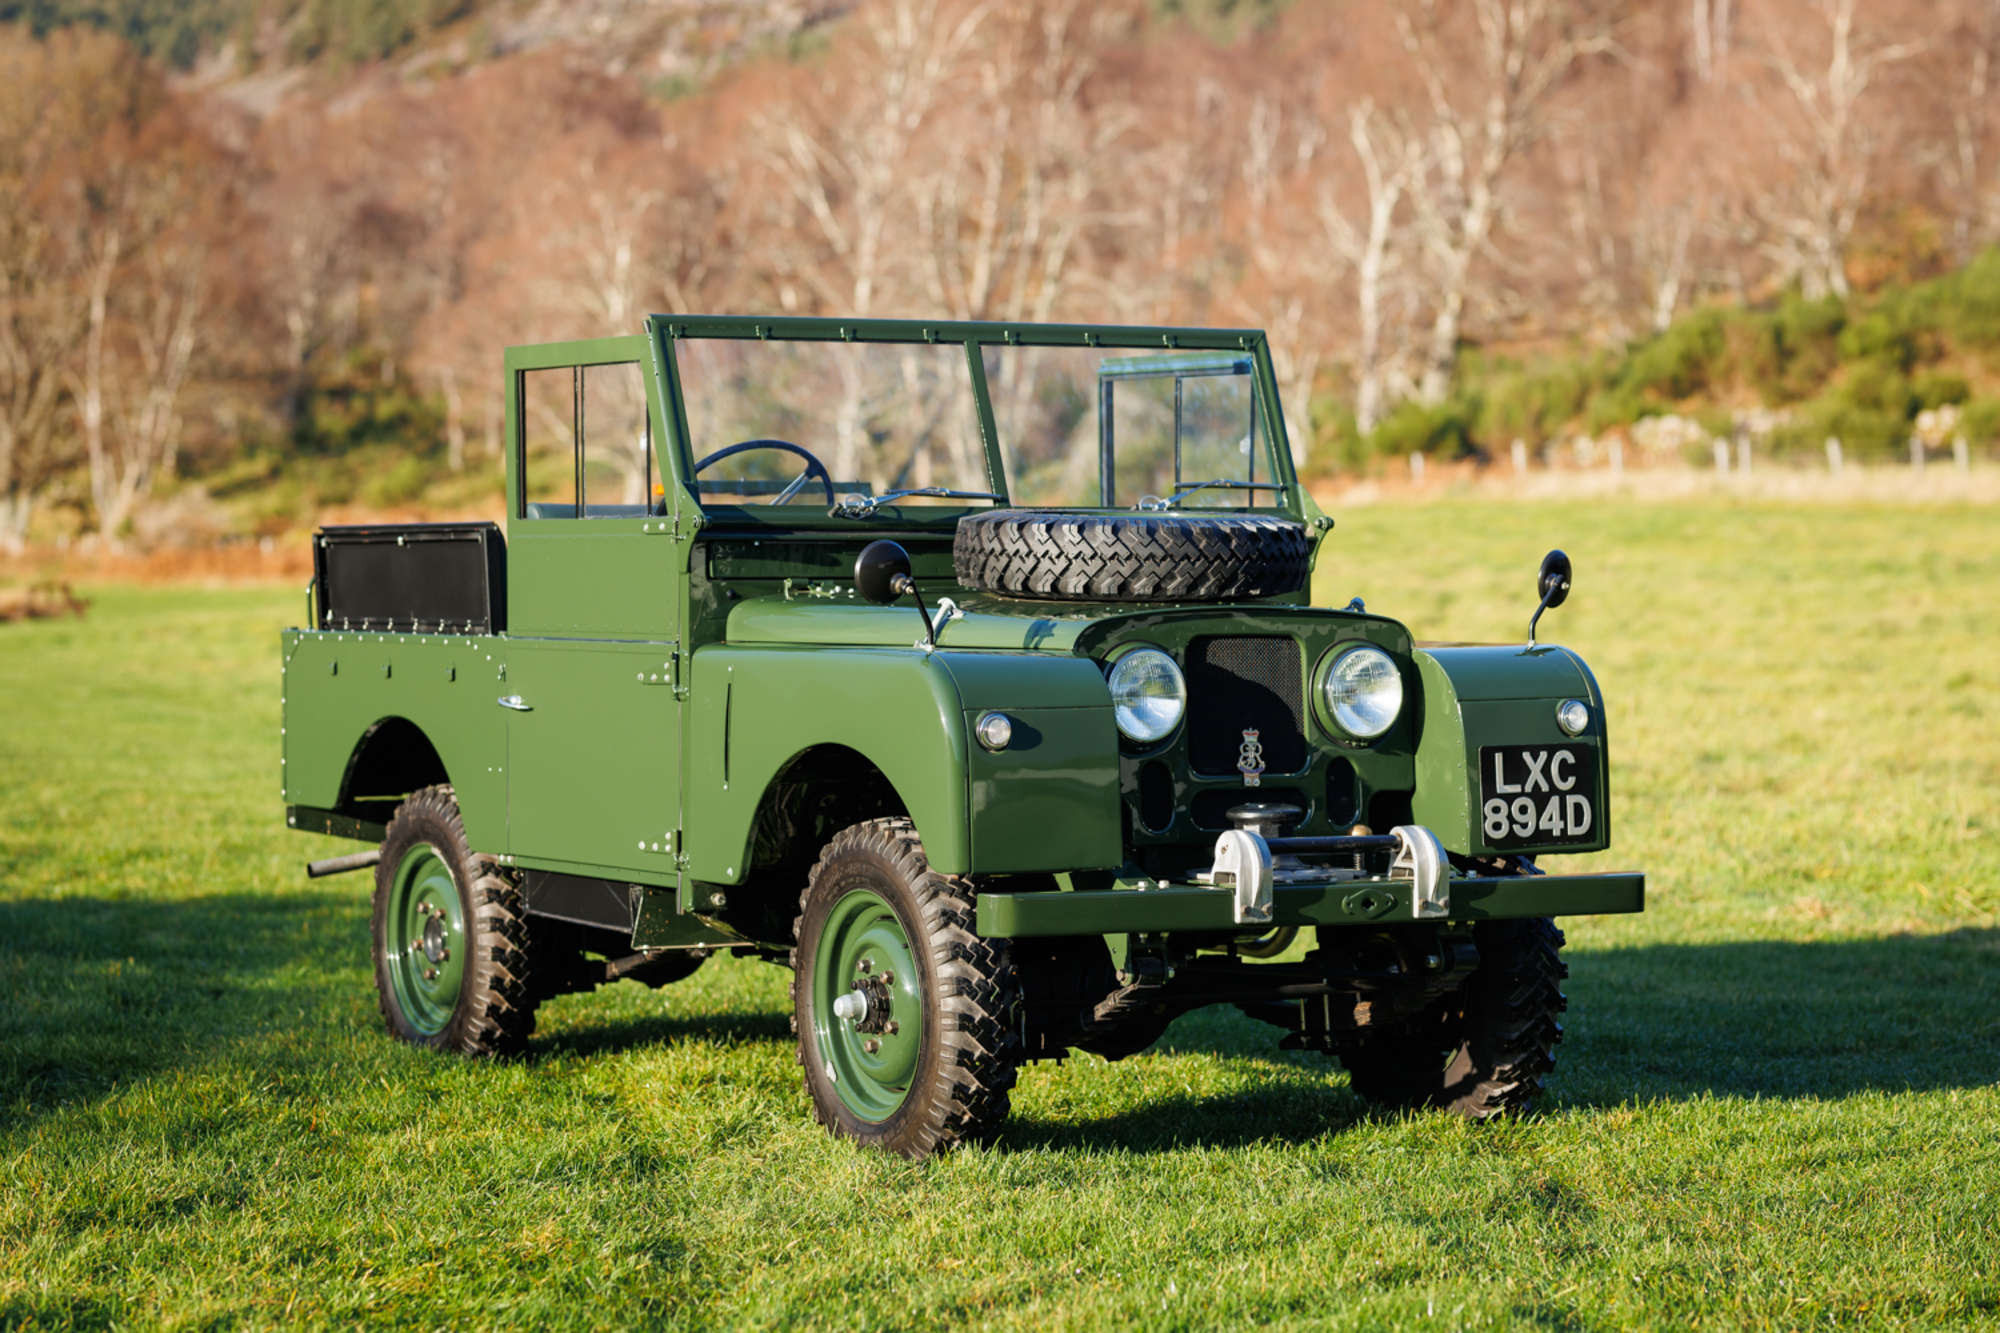 The unique Land Rover has been fully restored